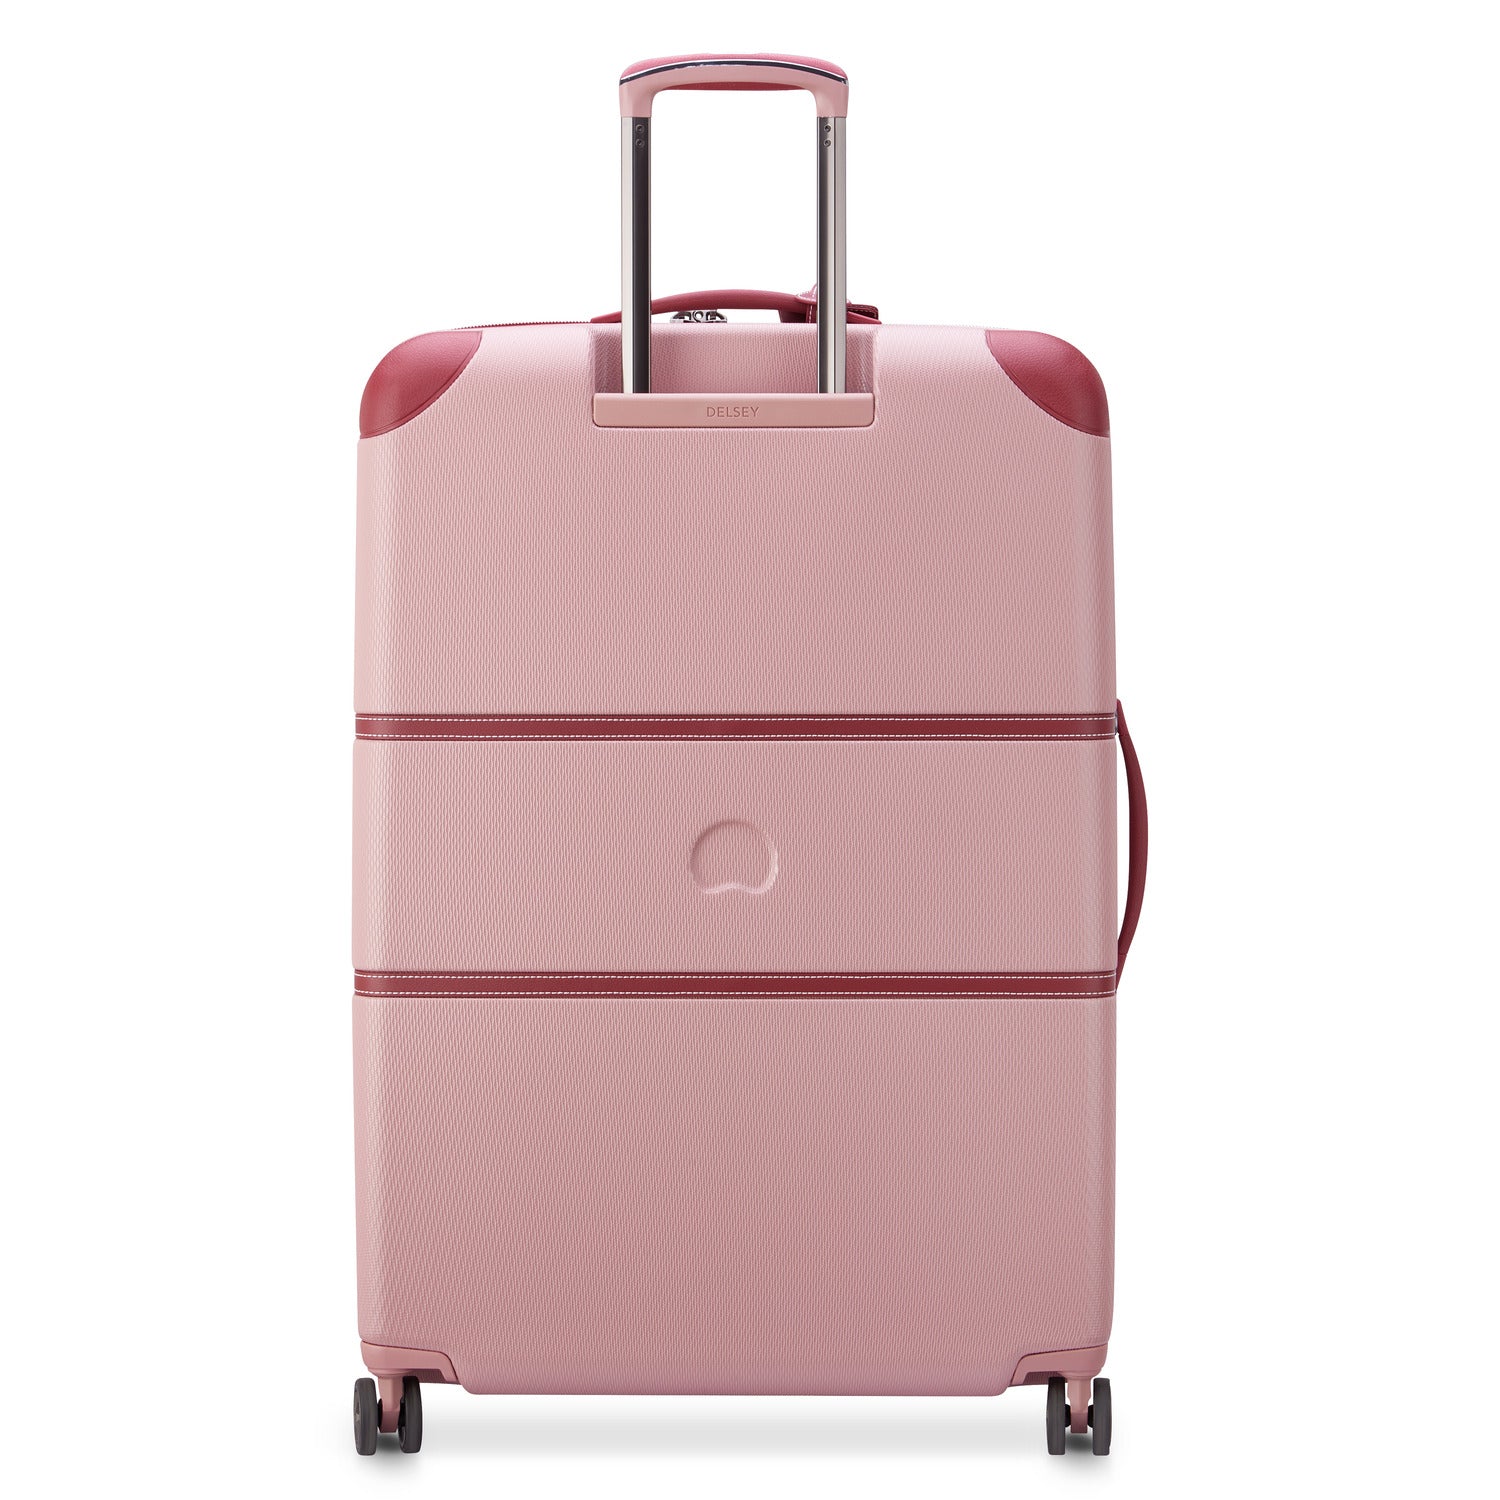 Delsey Chatelet Air 2.0 82cm Hardcase 4 Double Wheel Check-In Luggage Trolley Pink - 00167683109